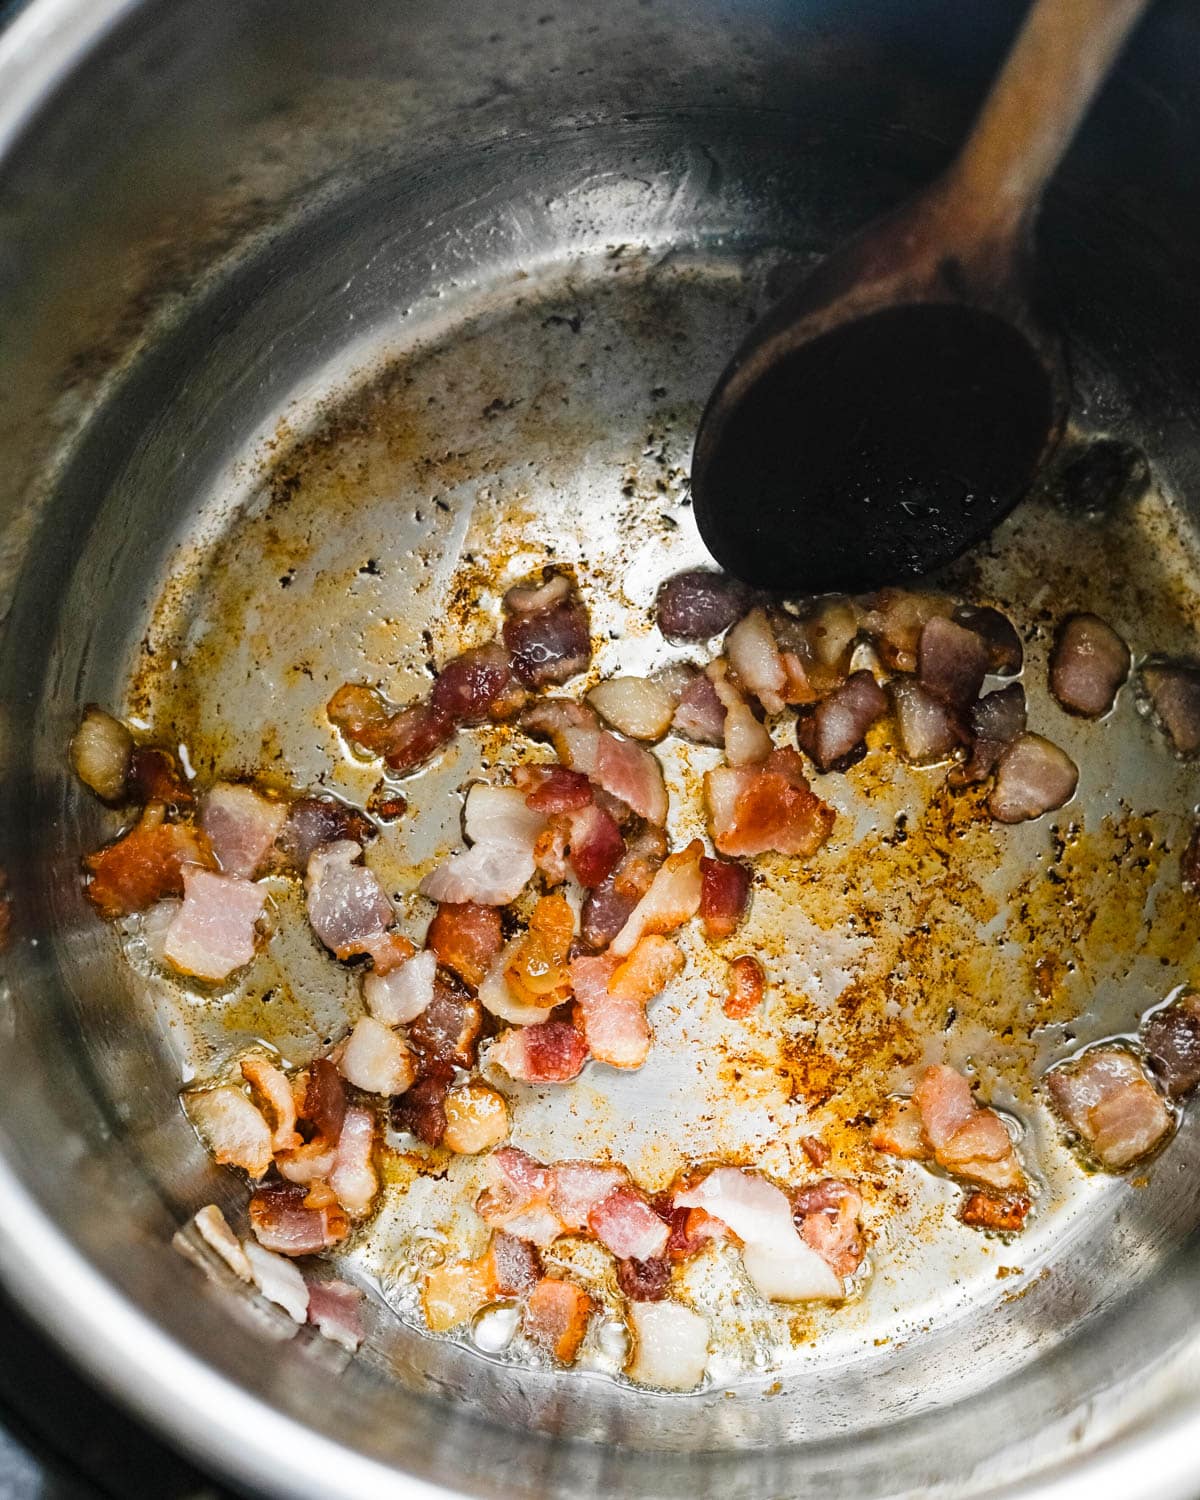 Crisping bacon in the Instant Pot.